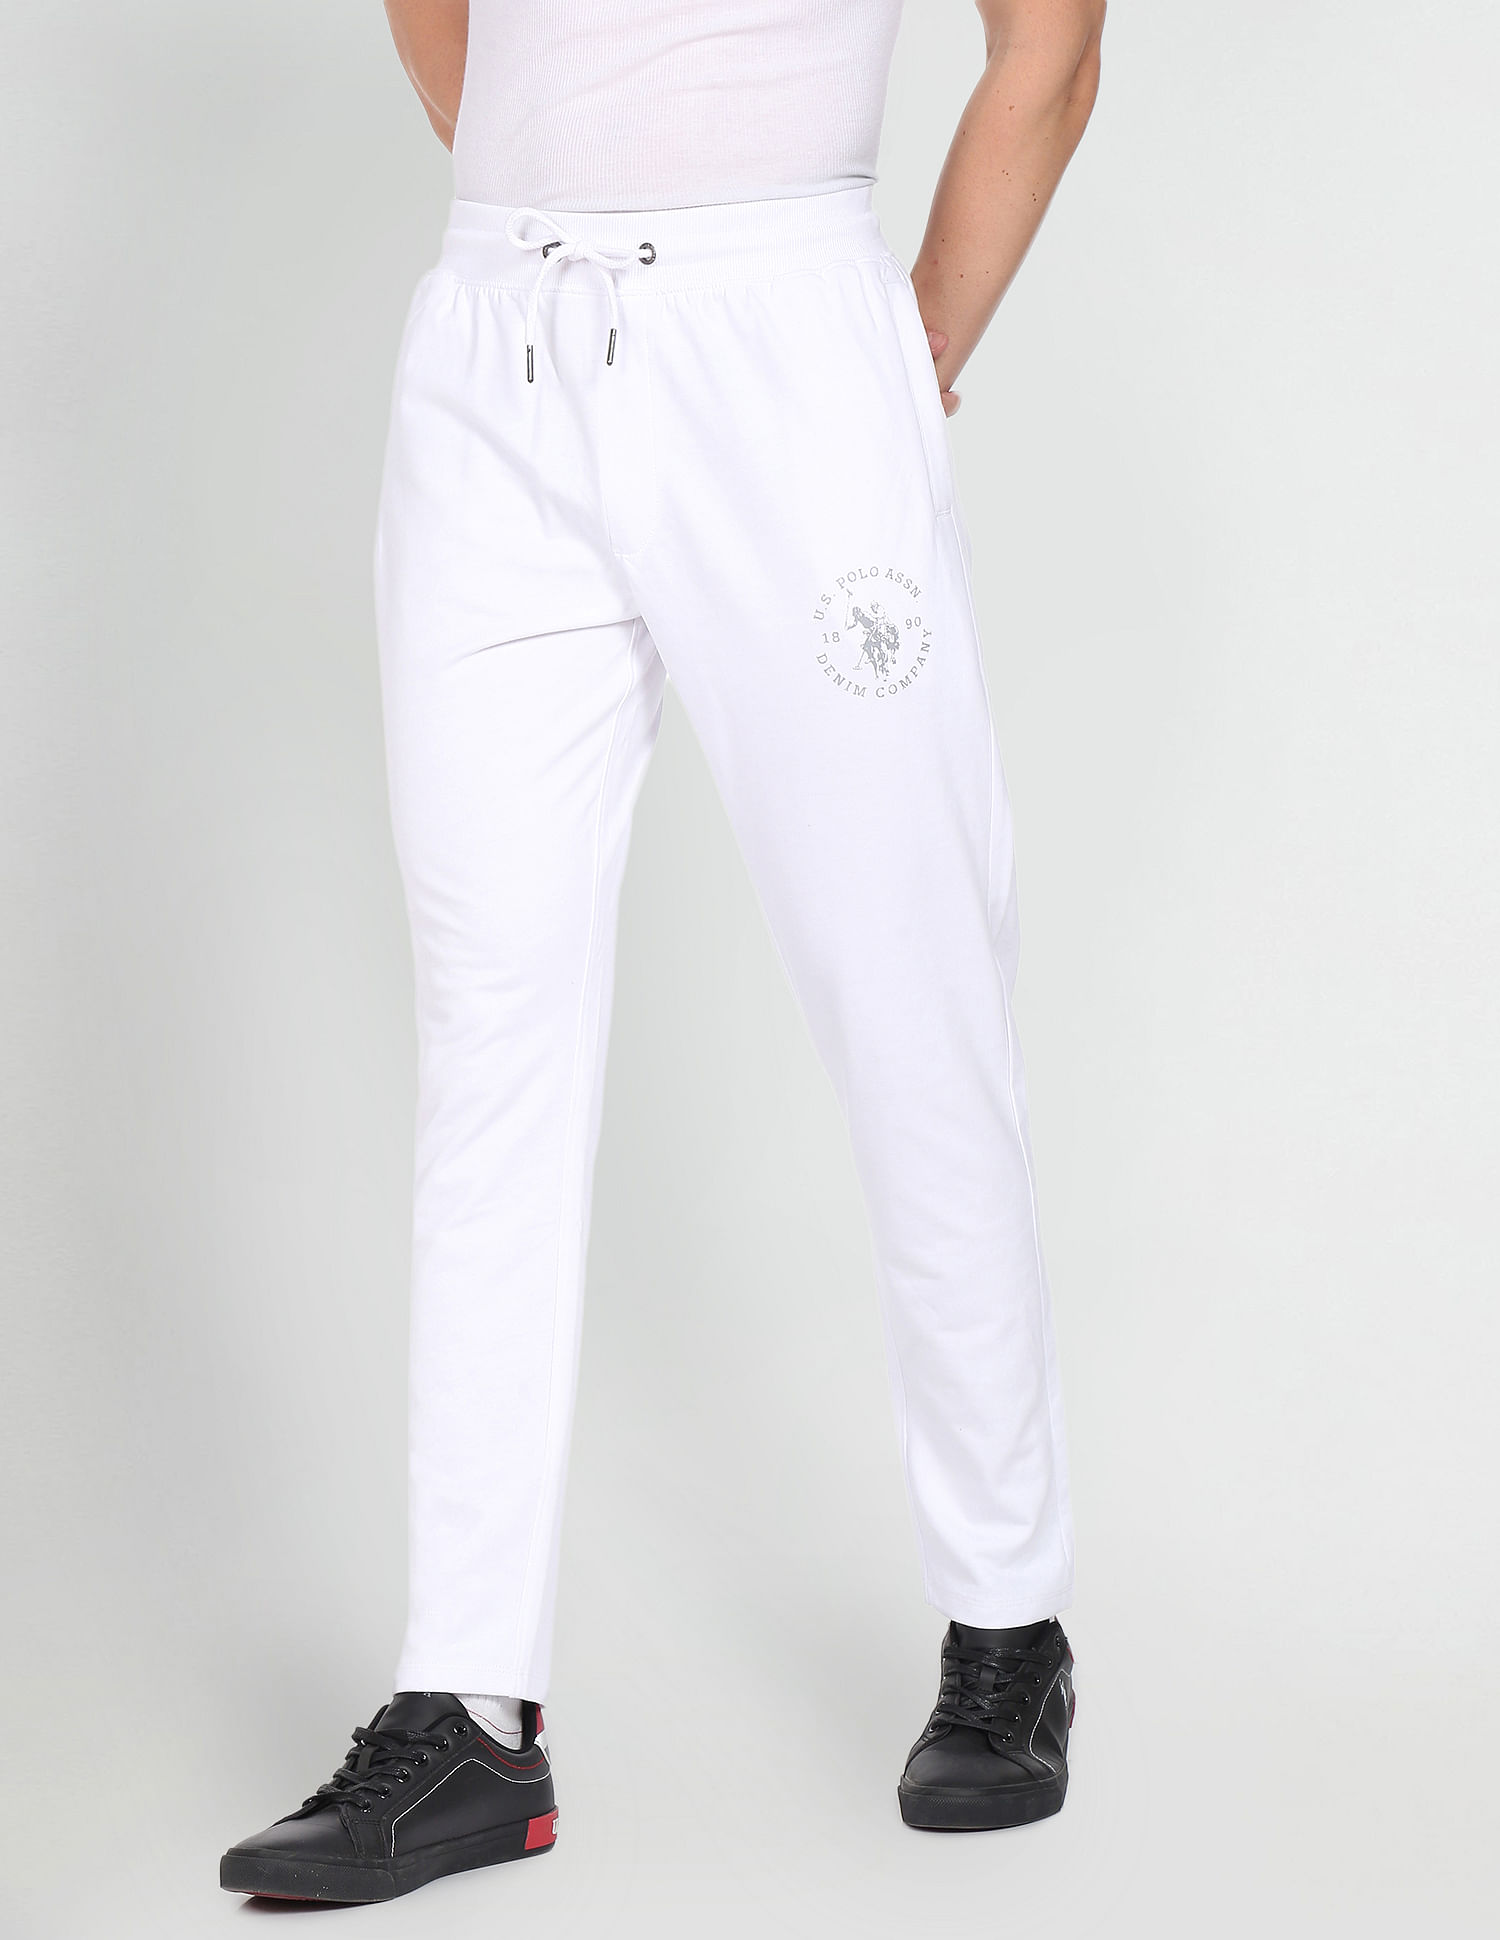 Buy Grey Track Pants for Men by US Polo Assn Online  Ajiocom